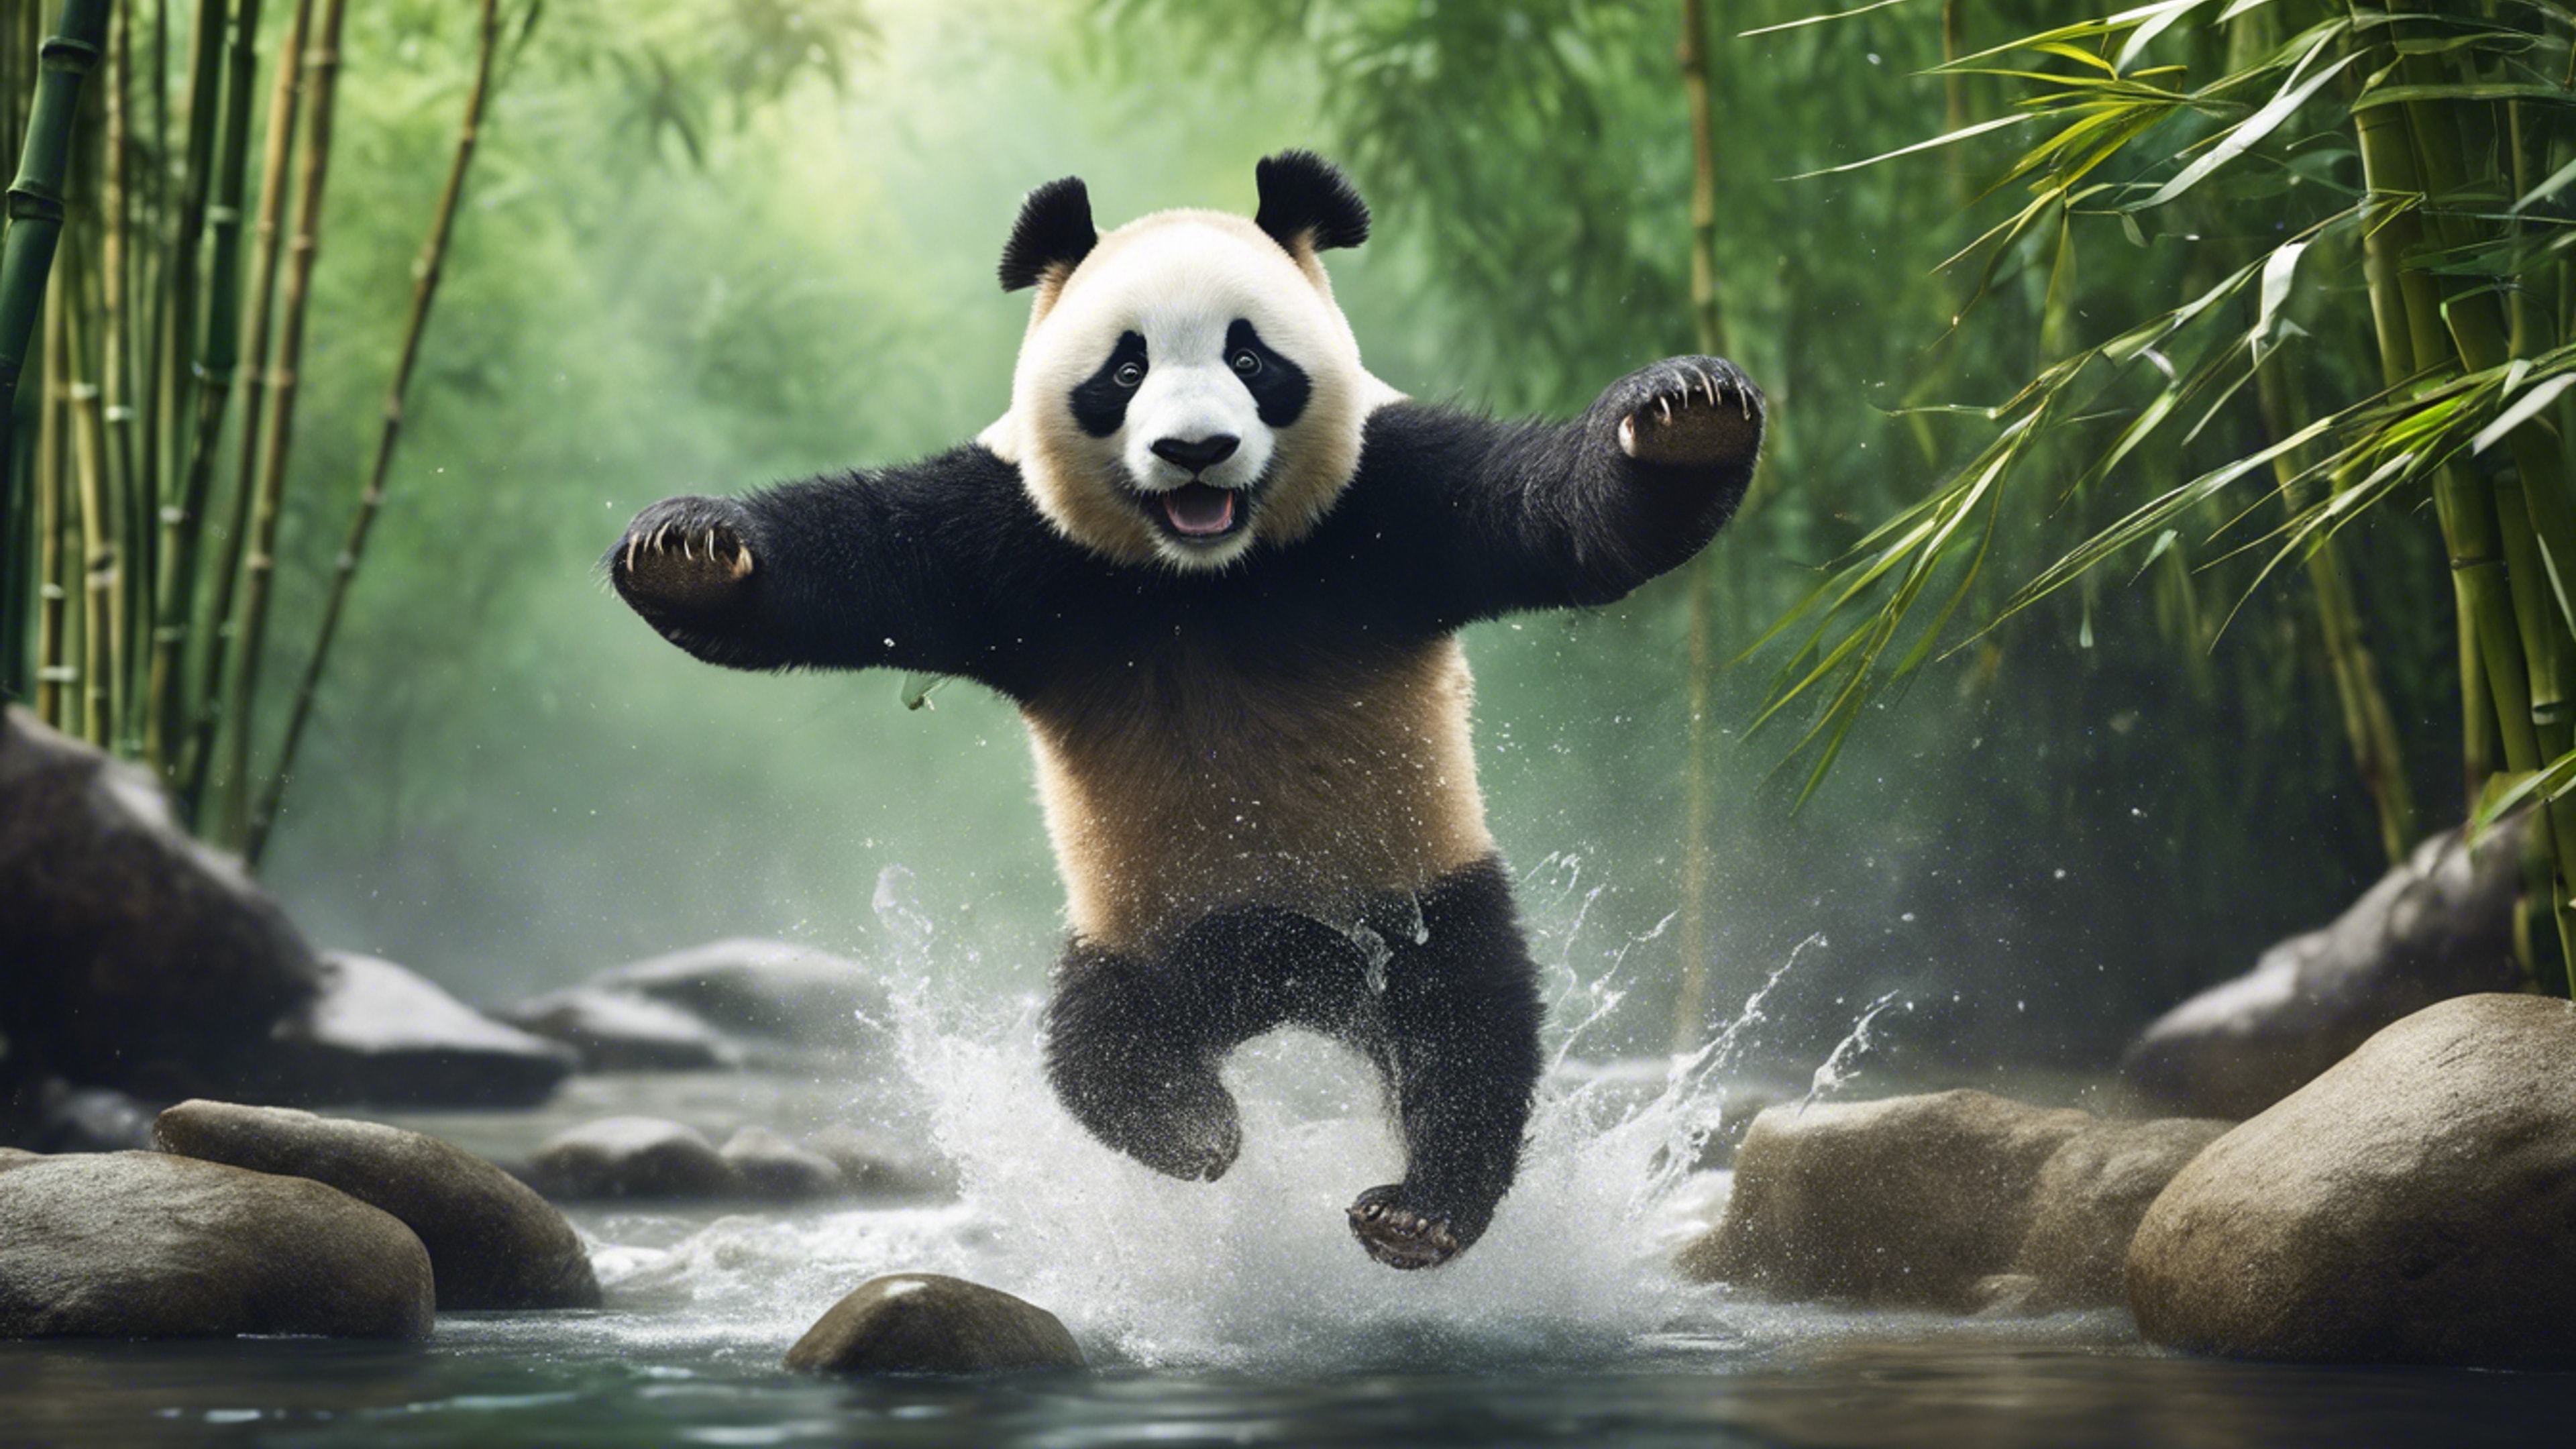 An adventurous panda leaping across a rapid creek with bamboo forests in the backdrop. Обои[317eaaa1af264f04a7c3]